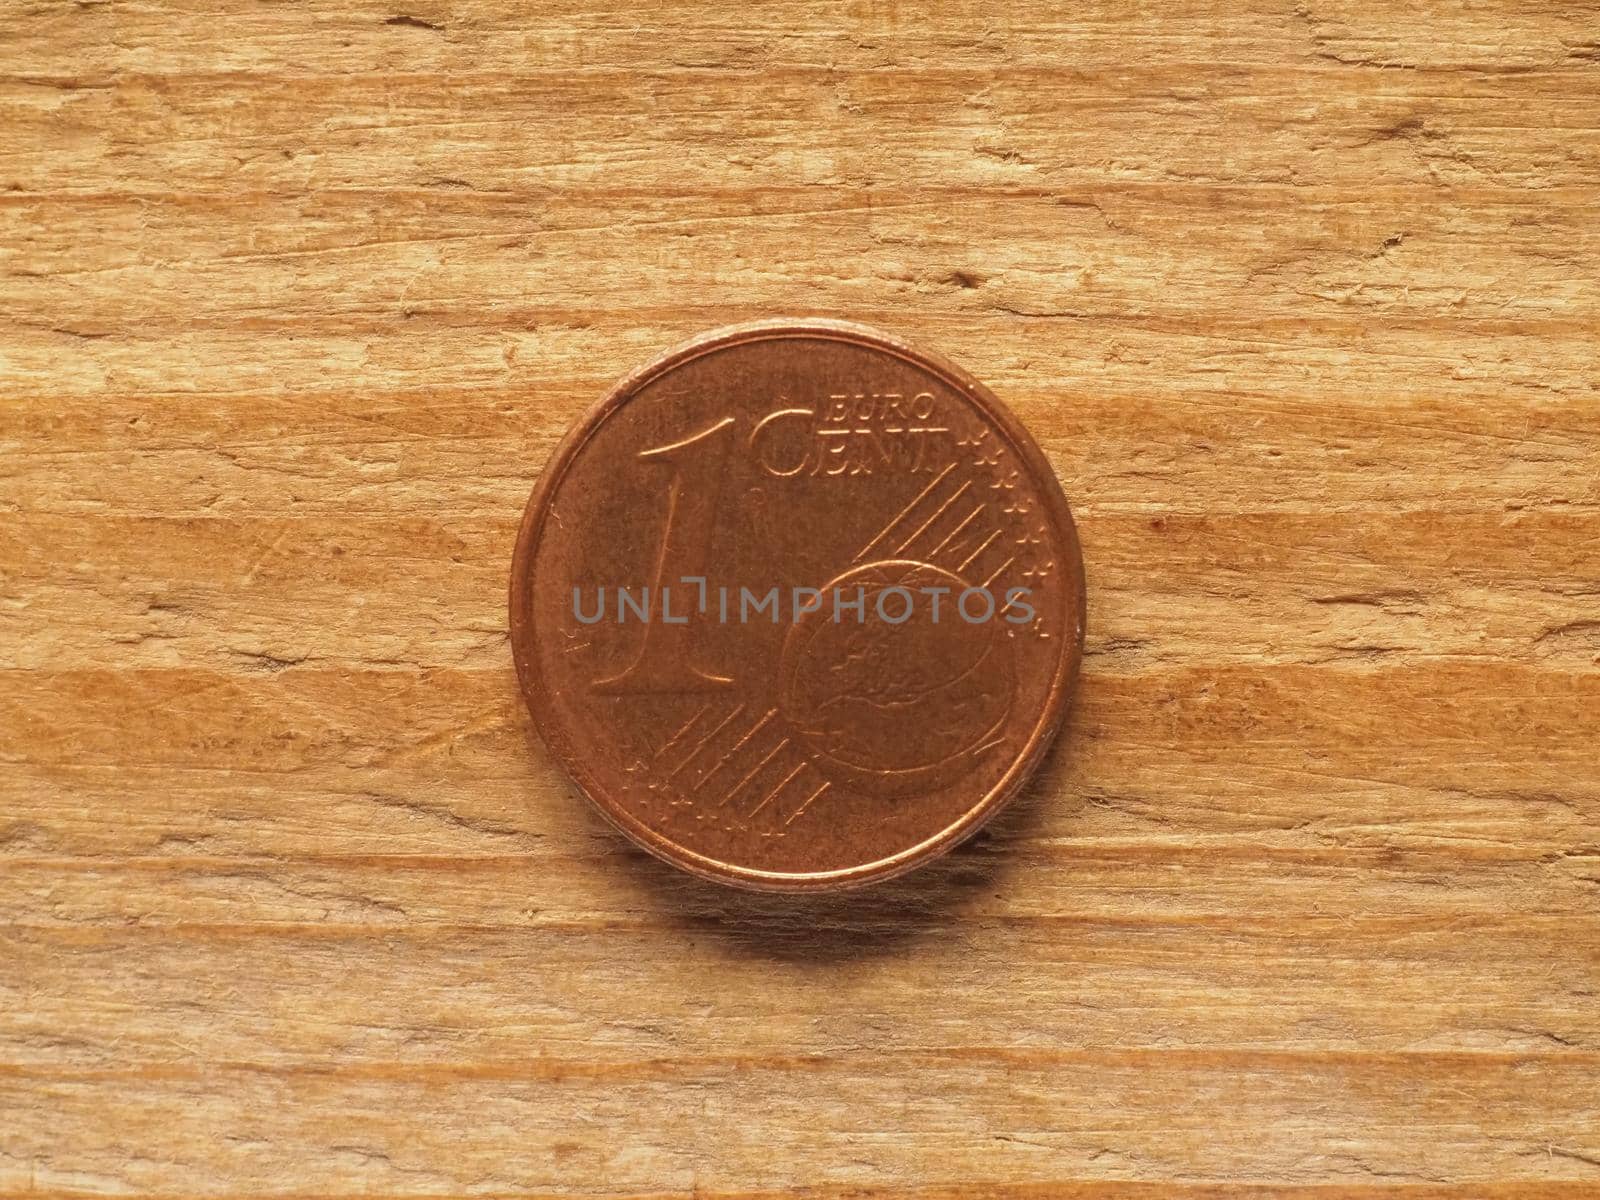 one cent coin common side, currency of the European Union